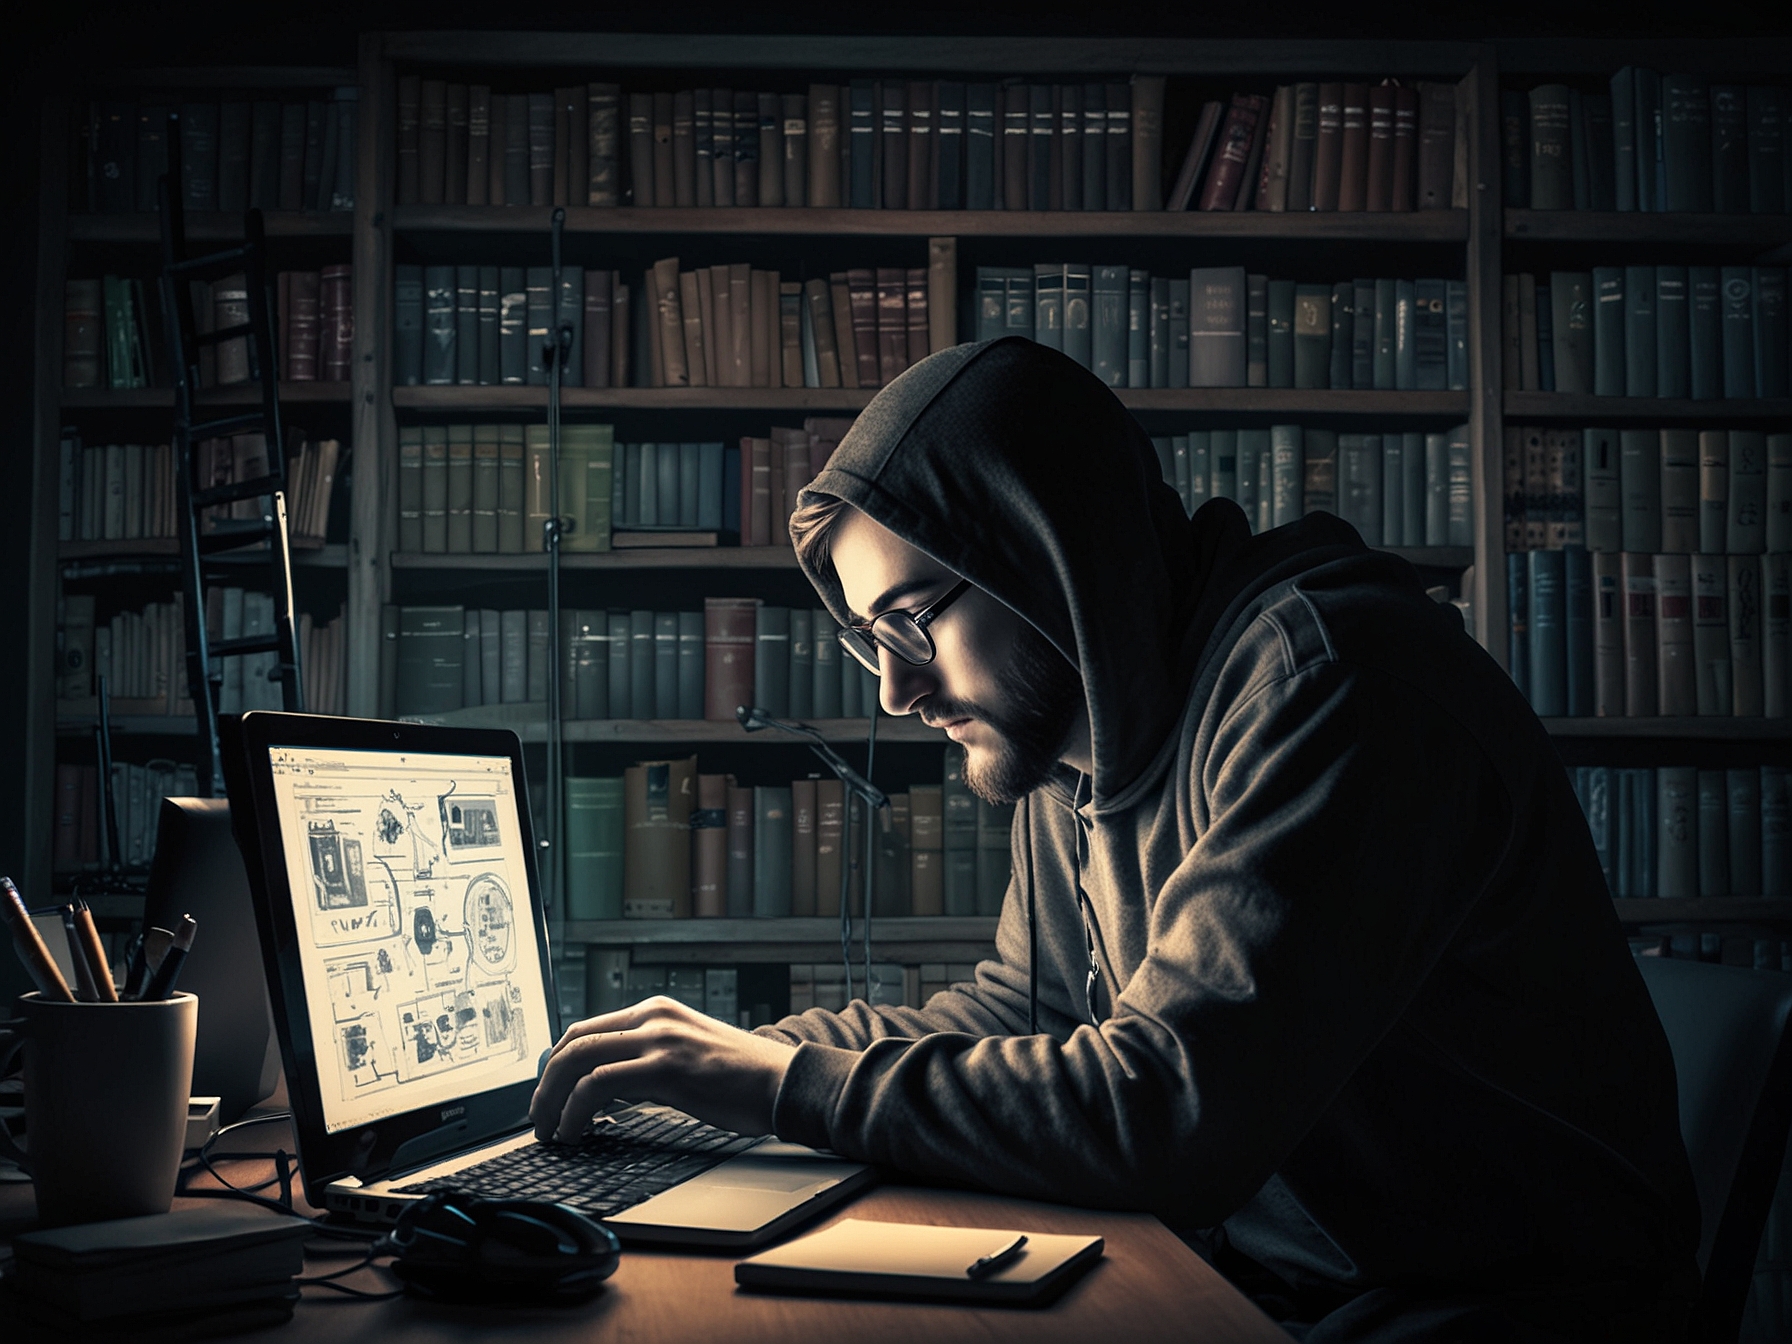 A beginner studying ethical hacking, surrounded by books on networking, operating systems, and programming languages while using a laptop with various hacking tools displayed.